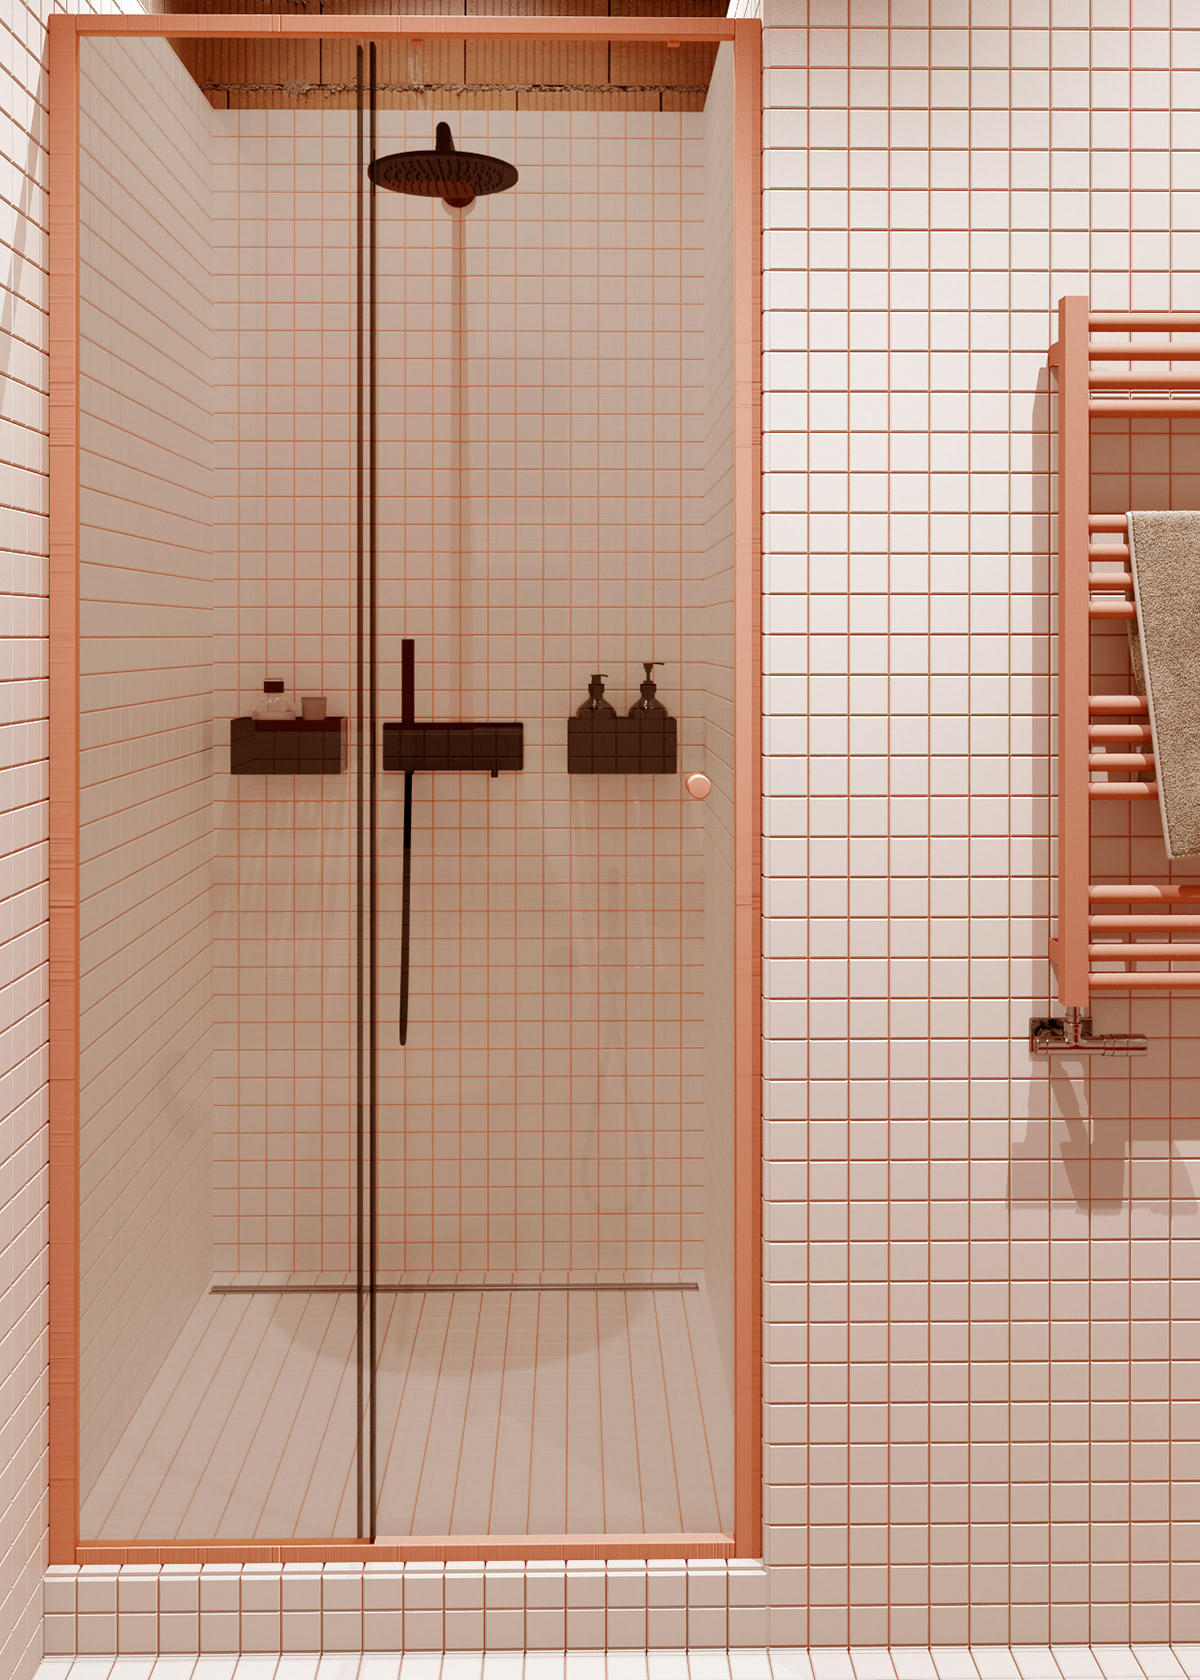 A shower area's orange frame matches the room's main color tone, creating a connection between the furniture and the entire interior.